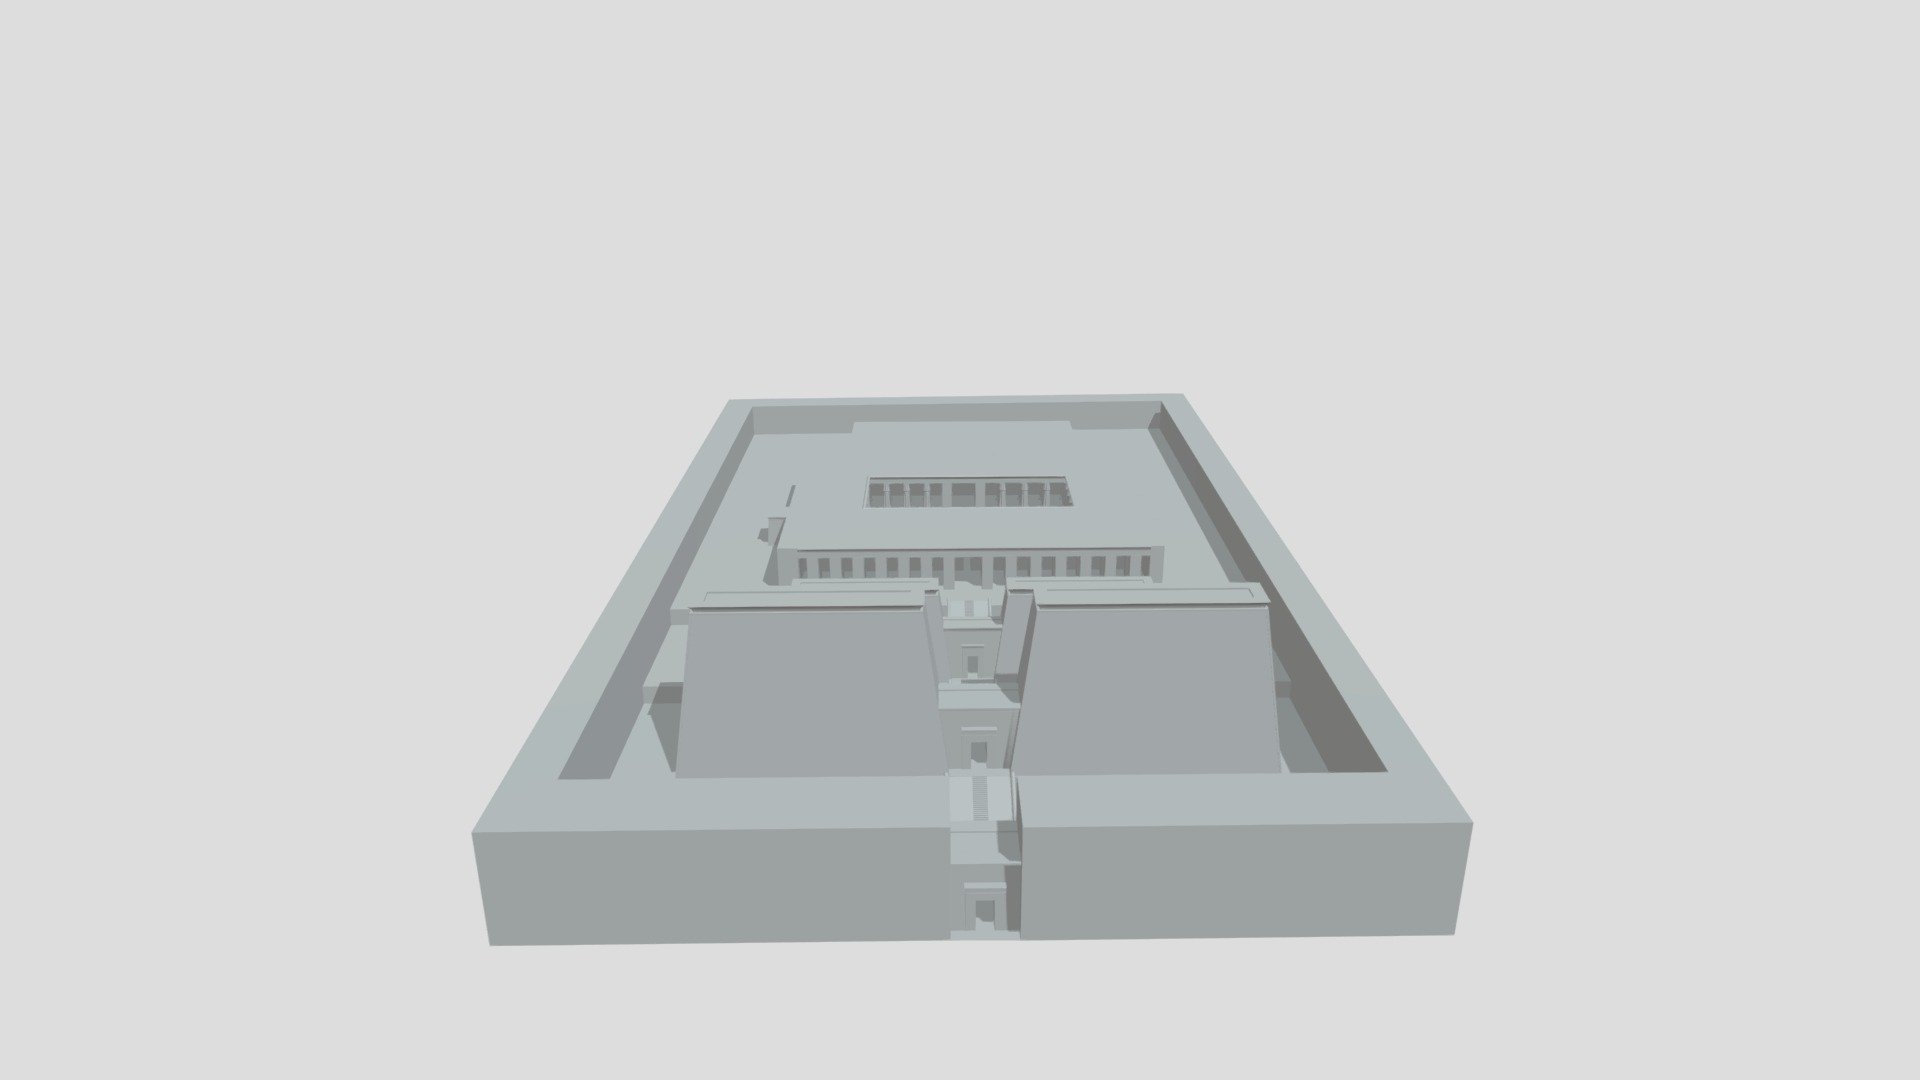 This is a 3D reconstruction of the mortuary temple of Thutmose IV, which was originally created during the Egyptian New Kingdom. This site is located in modern day Luxor, which is the location of ancient Thebes. This 3D model was created using the architectural measurements found in the publications of Pietre 3d model